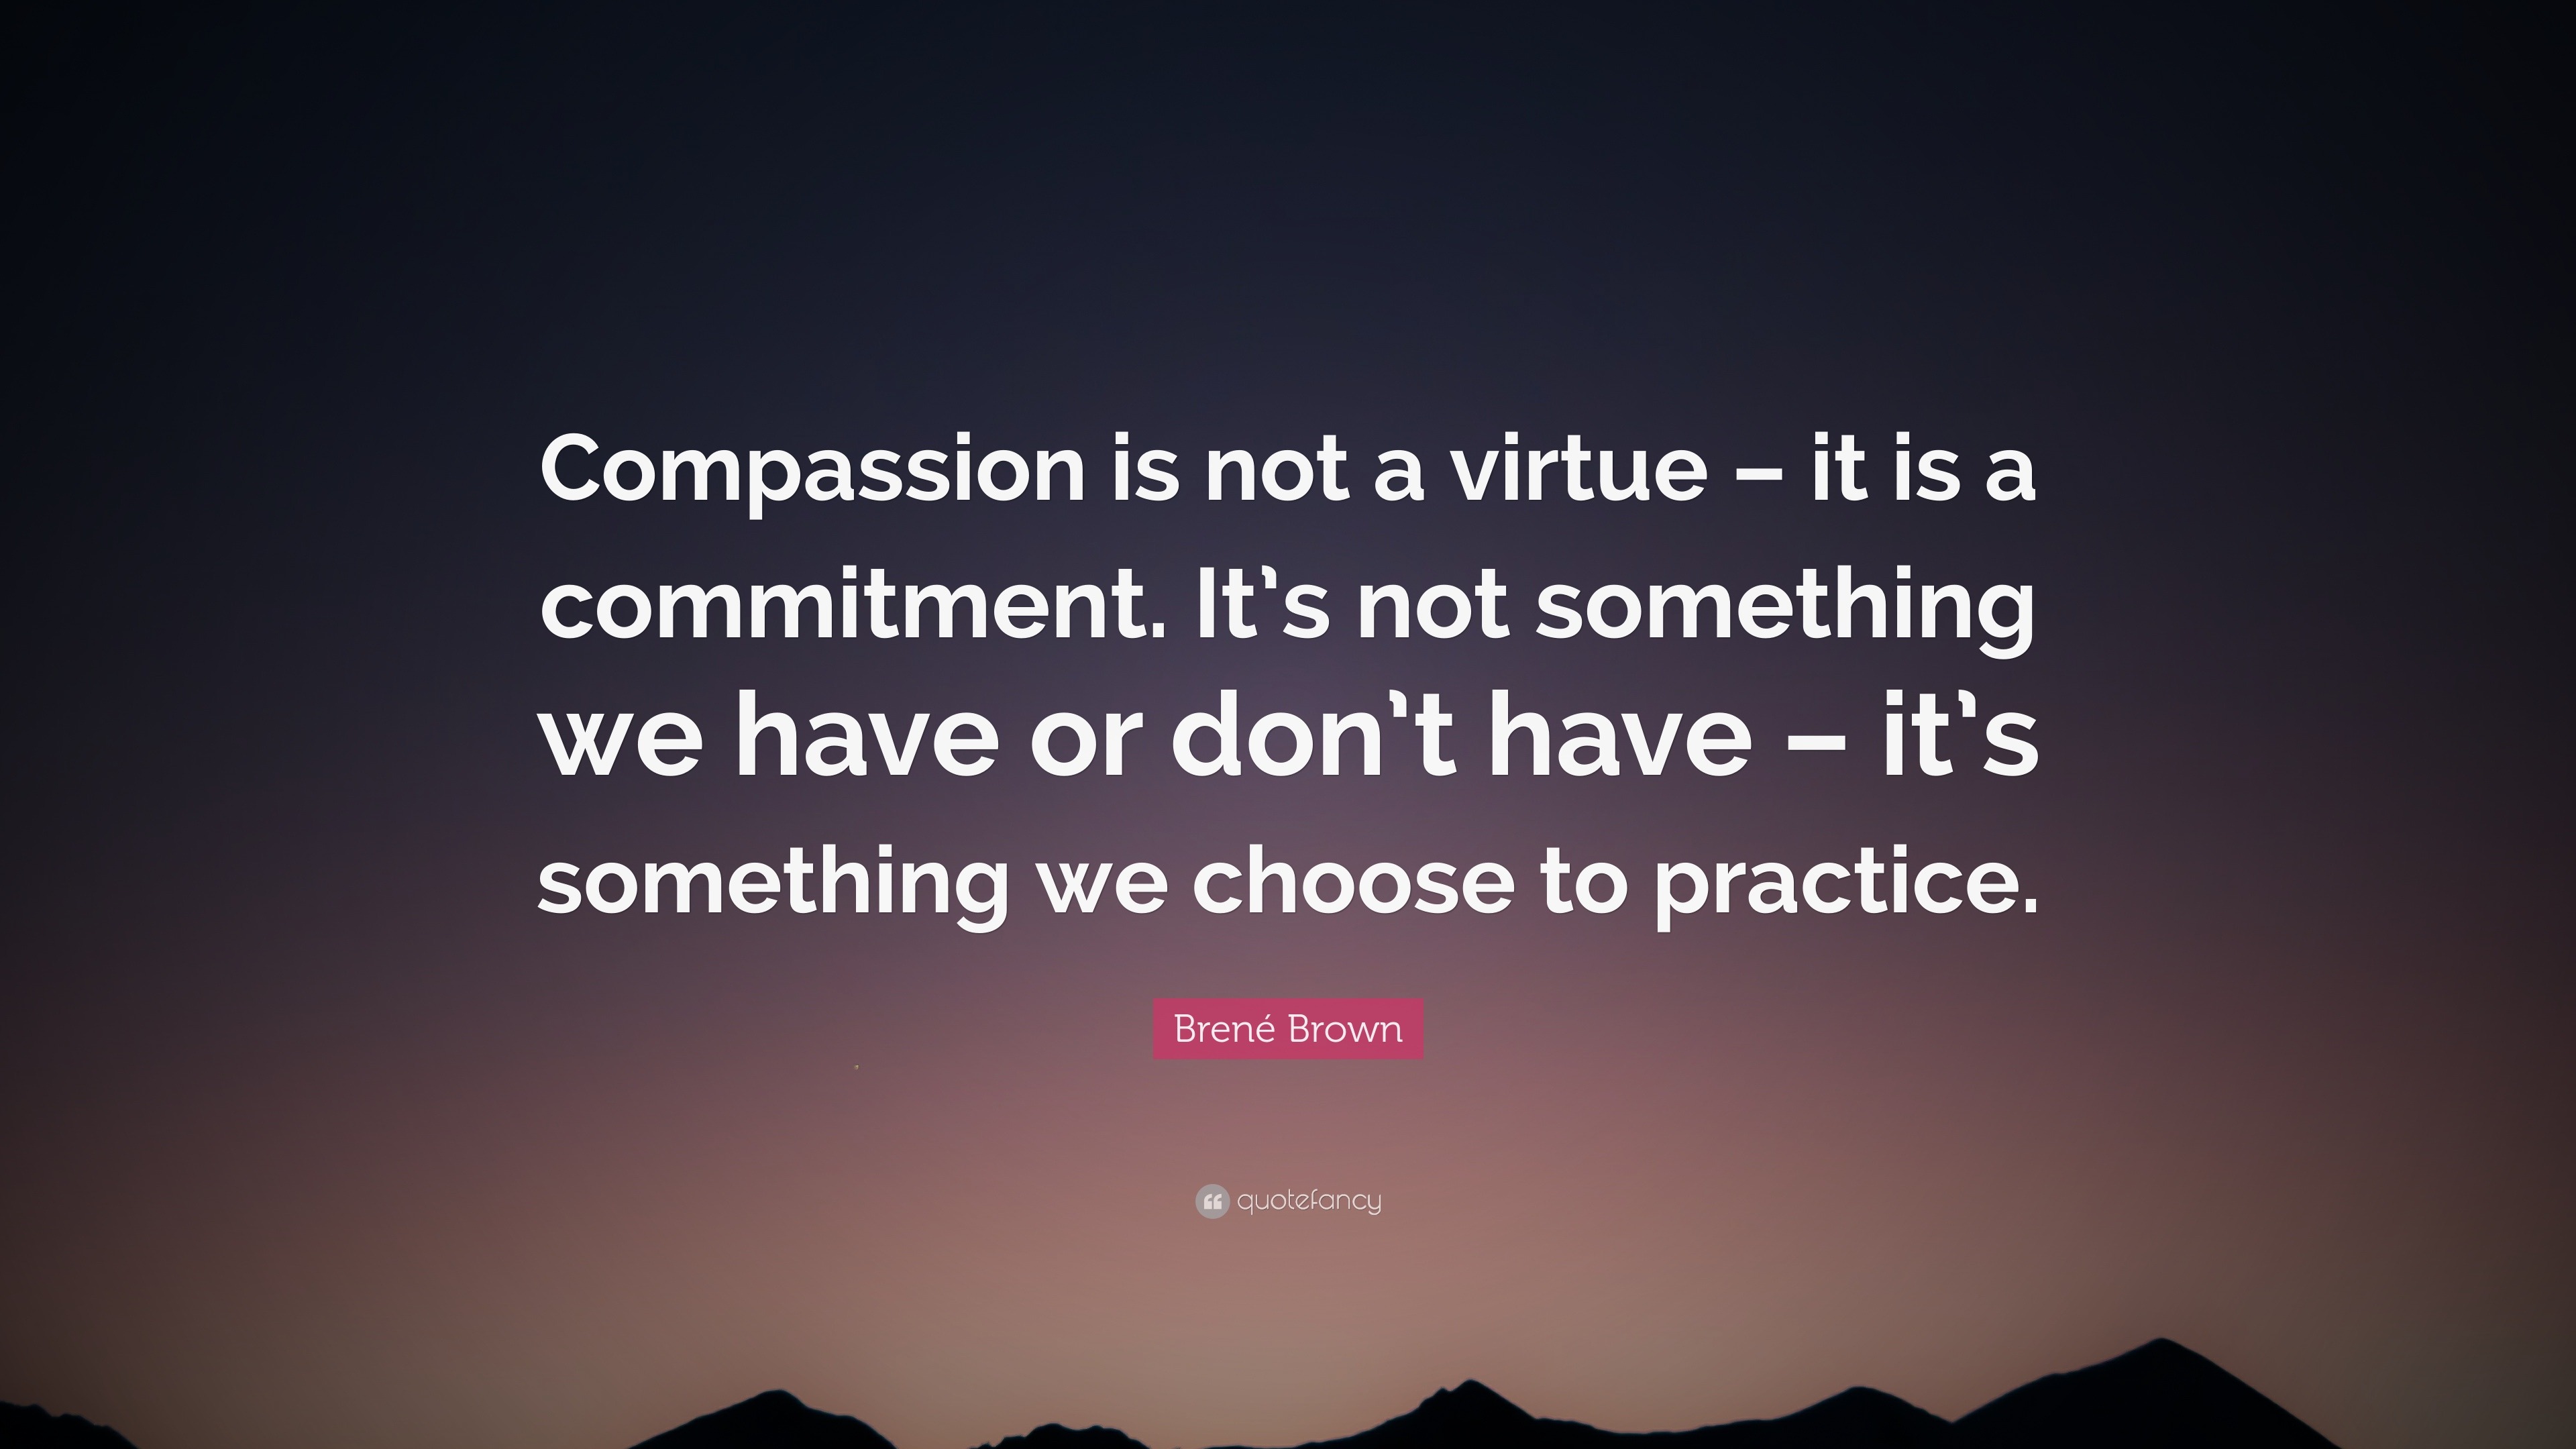 Brené Brown Quote: “Compassion is not a virtue – it is a commitment. It